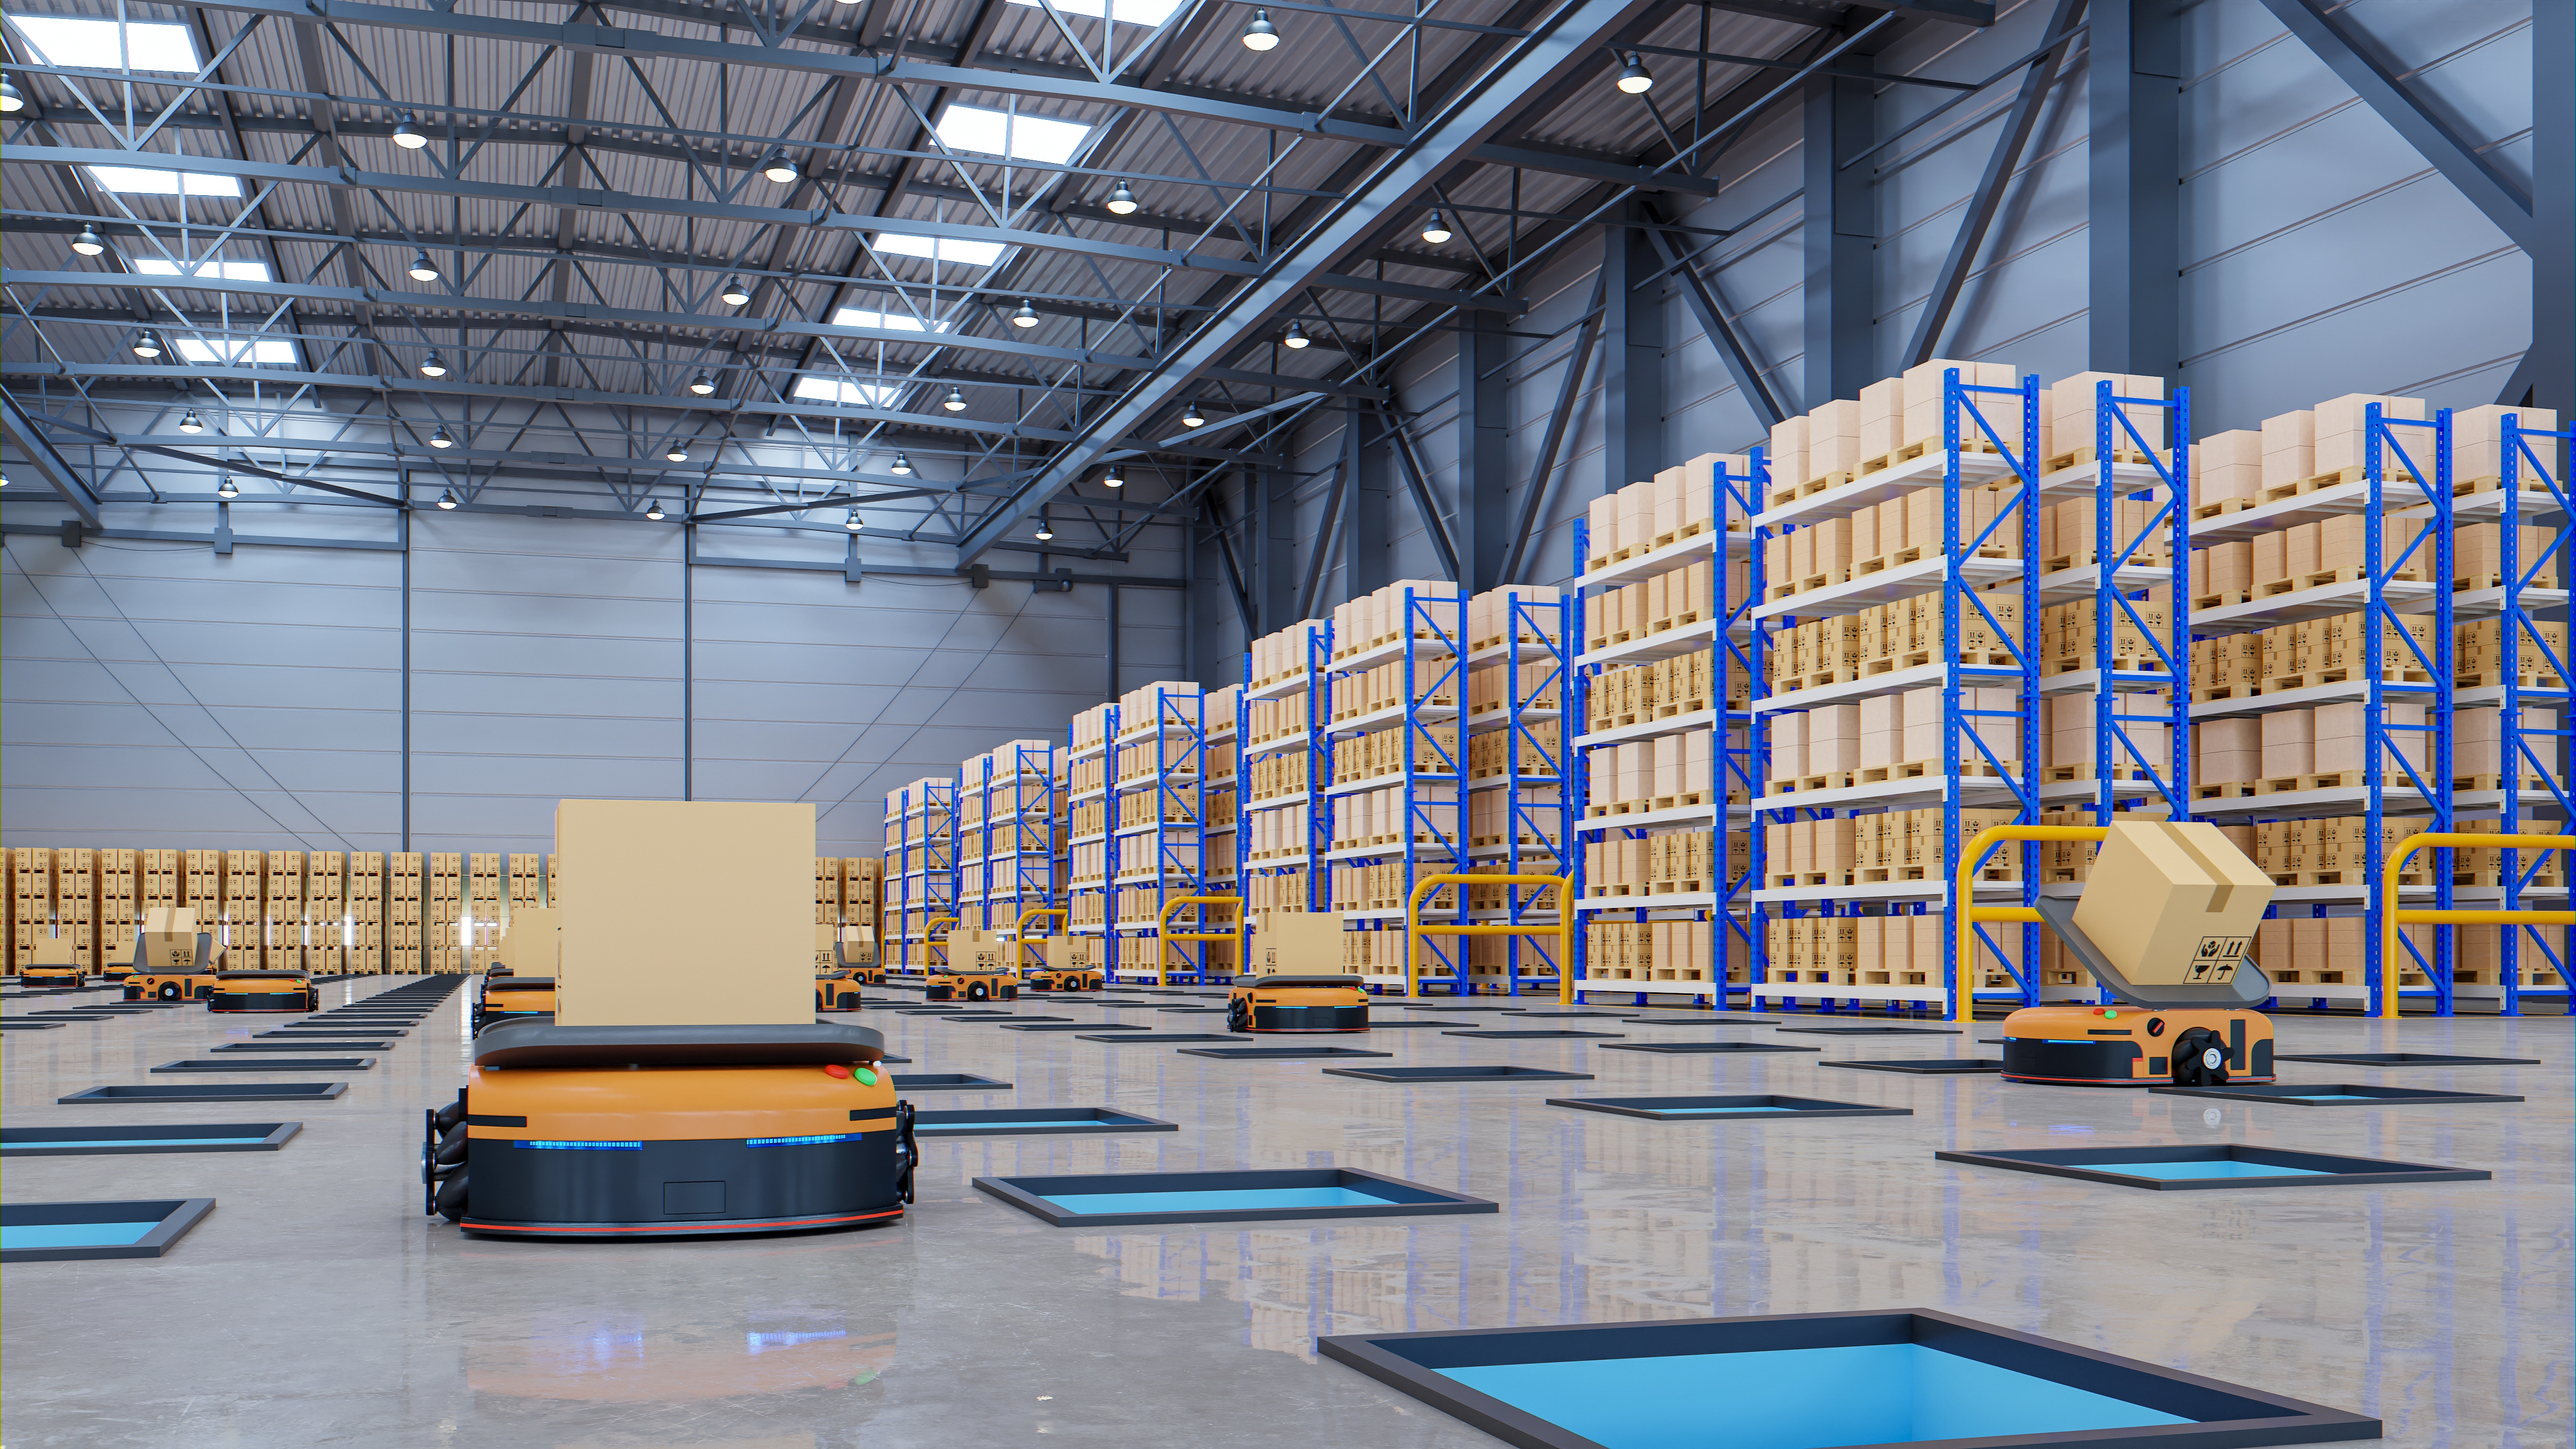 Warehouse with holes in the ground and automated guided vehicles that bring packages to the respected drop zone